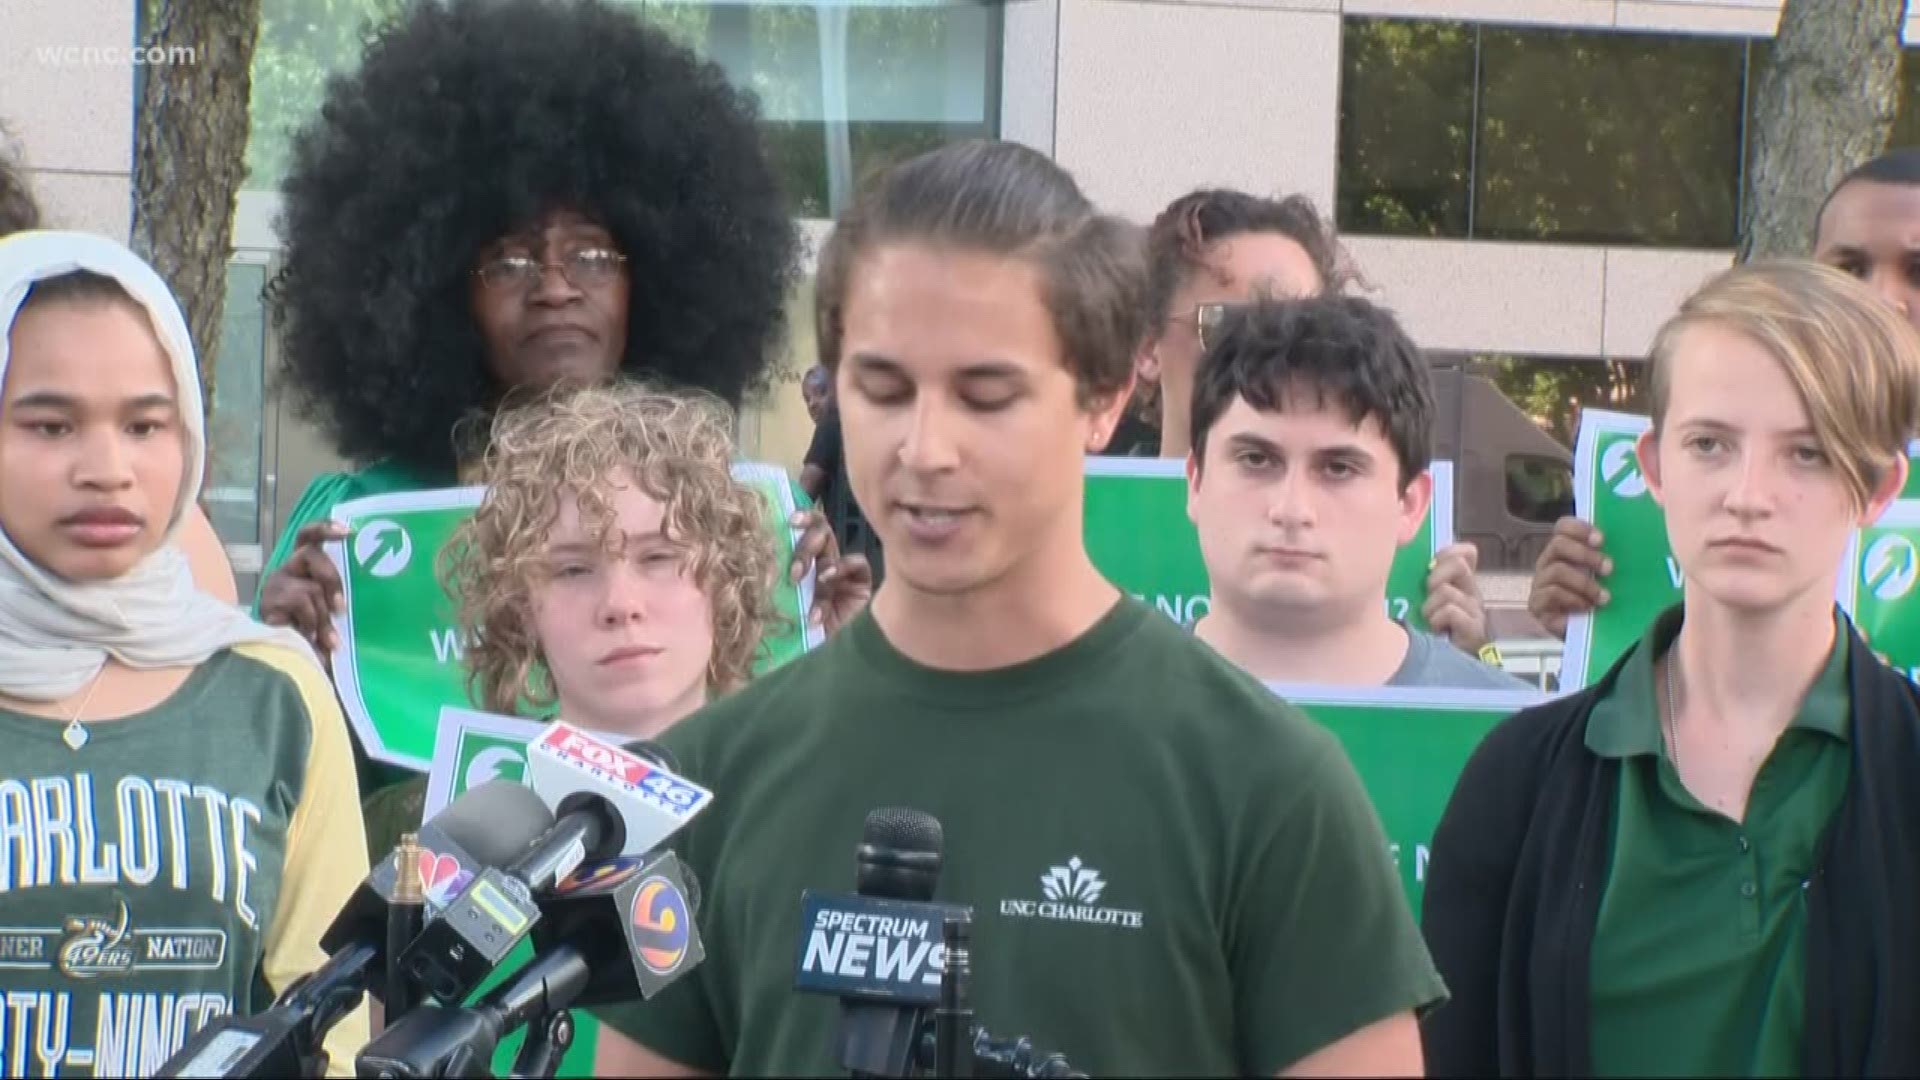 The Real Change Now Coalition from UNC Charlotte held a news conference in uptown Charlotte Tuesday, calling for an end to gun violence following the shooting on campus.